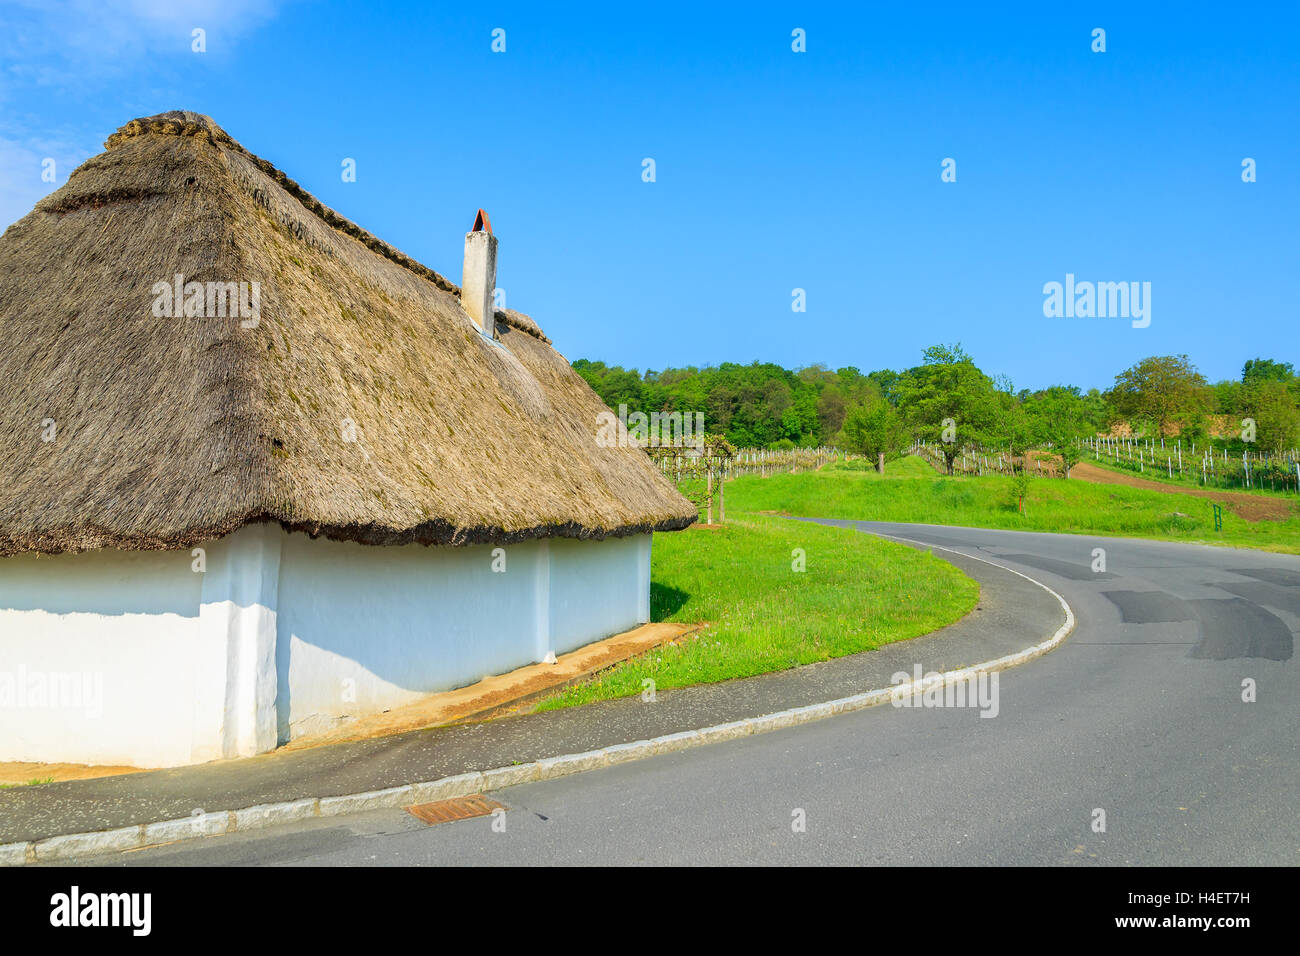 White cottage with thatched roof along a rural road, Burgenland, southern Austria Stock Photo